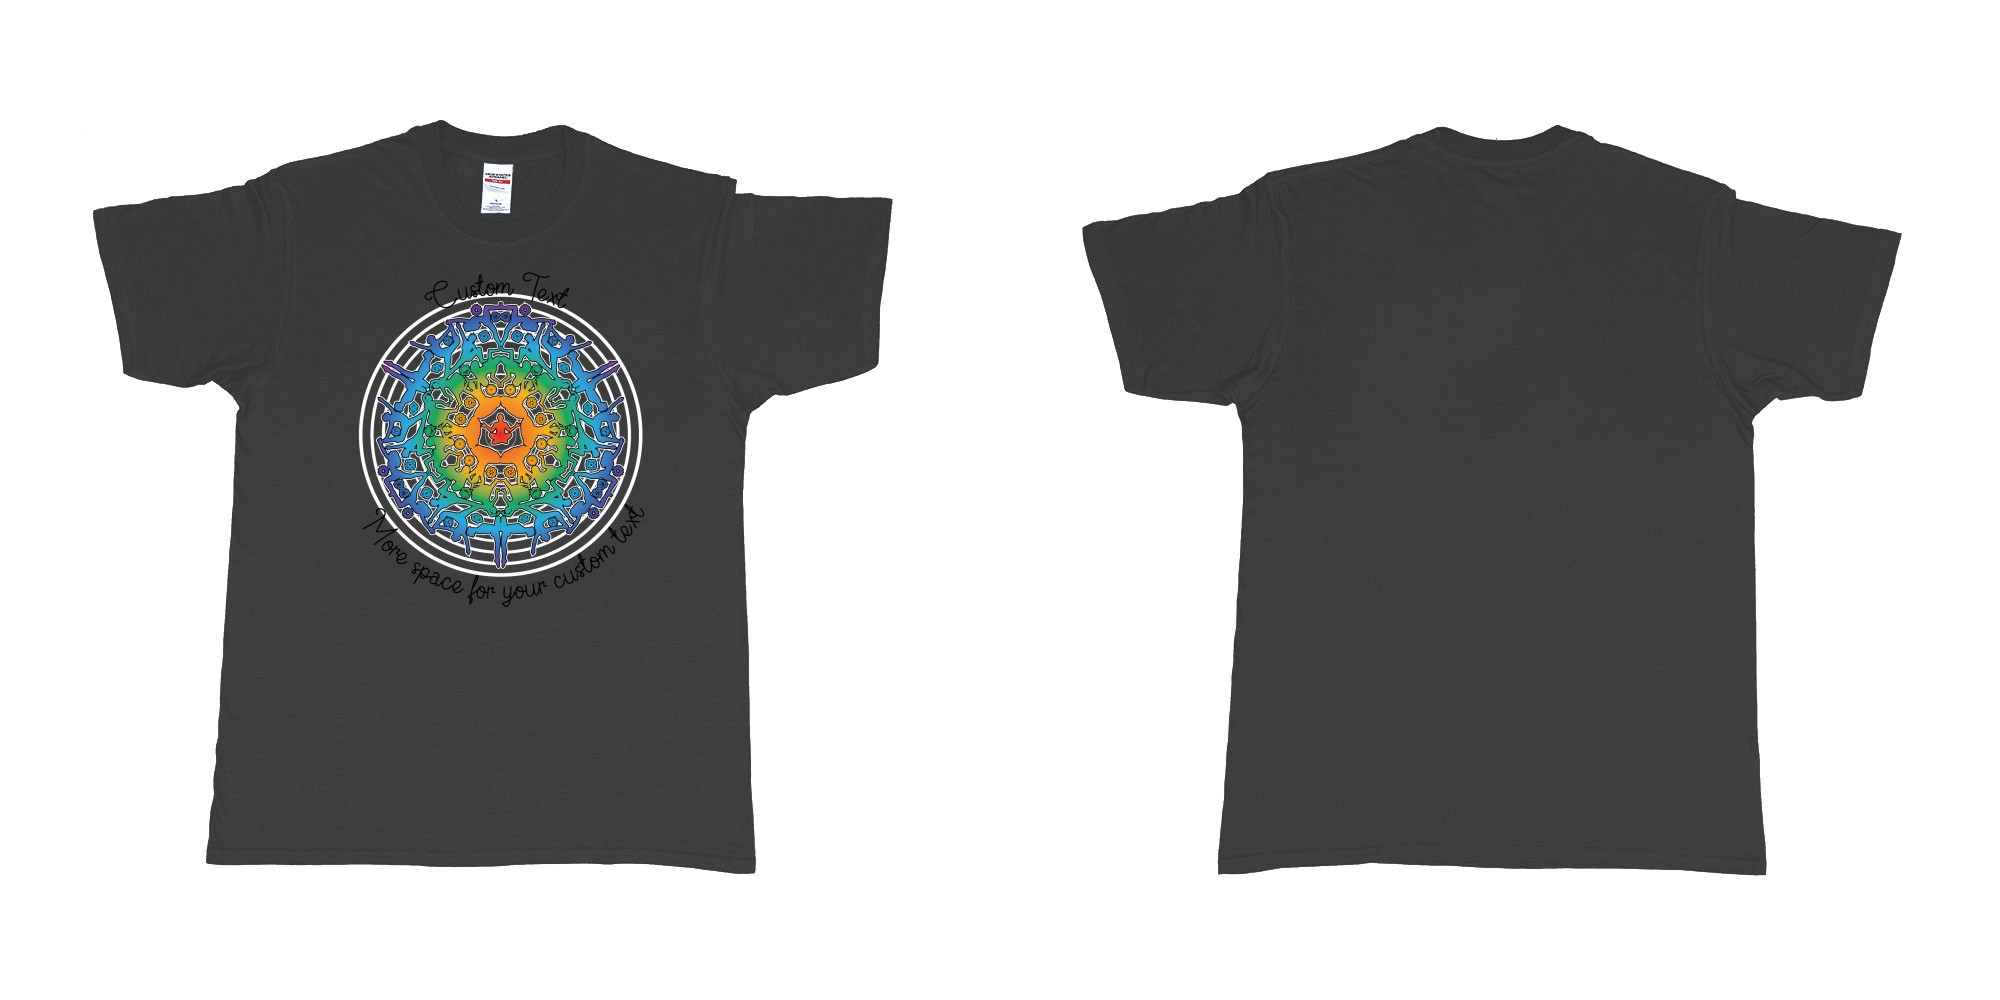 Custom tshirt design yoga mandala in fabric color black choice your own text made in Bali by The Pirate Way